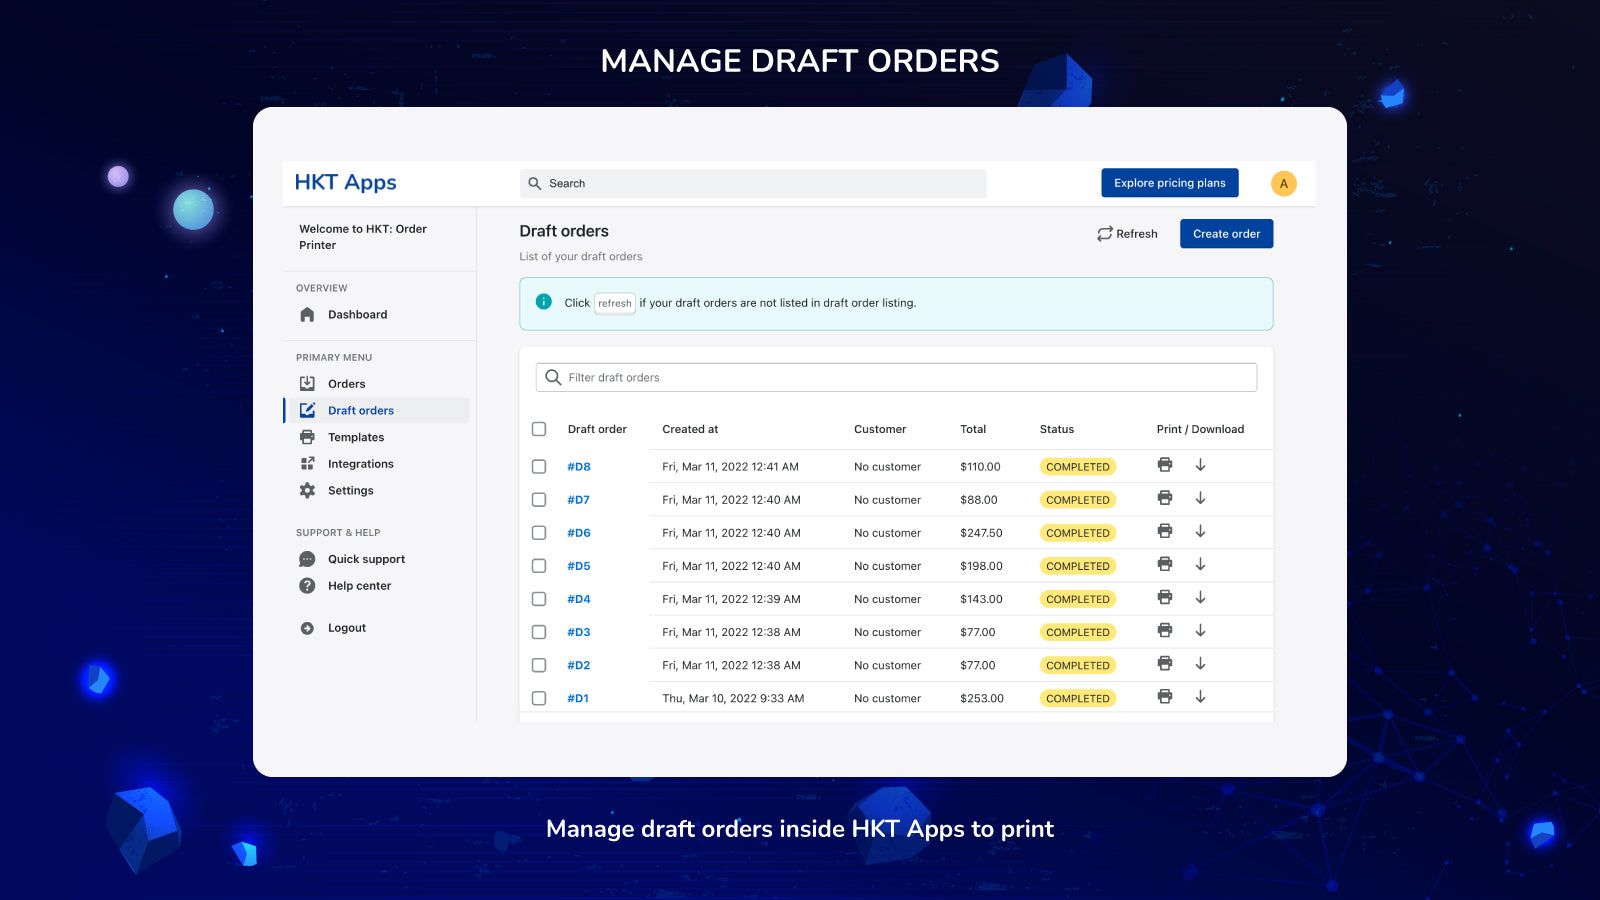 Manage draft orders in HKT Apps to print